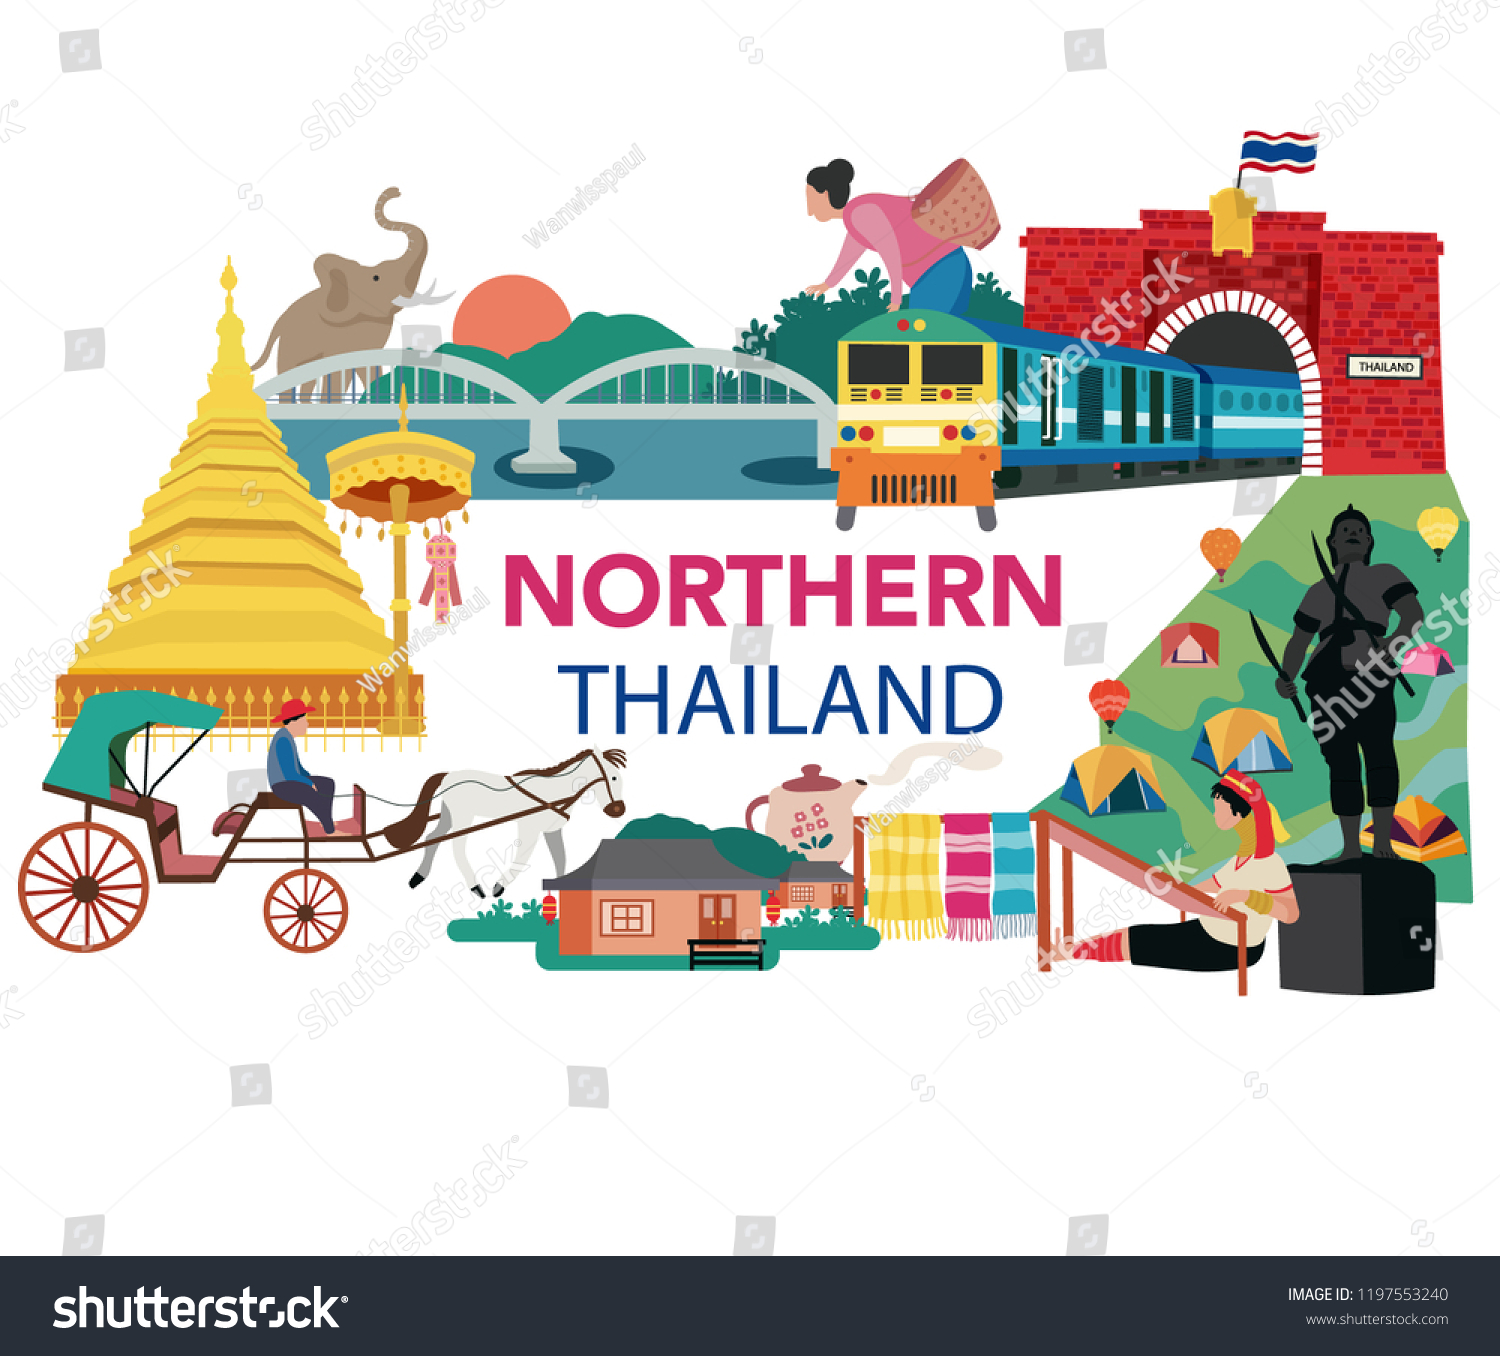 SVG of Thailand northern region traveling concept with the local landmarks, all in flat style design, illustration, vector svg